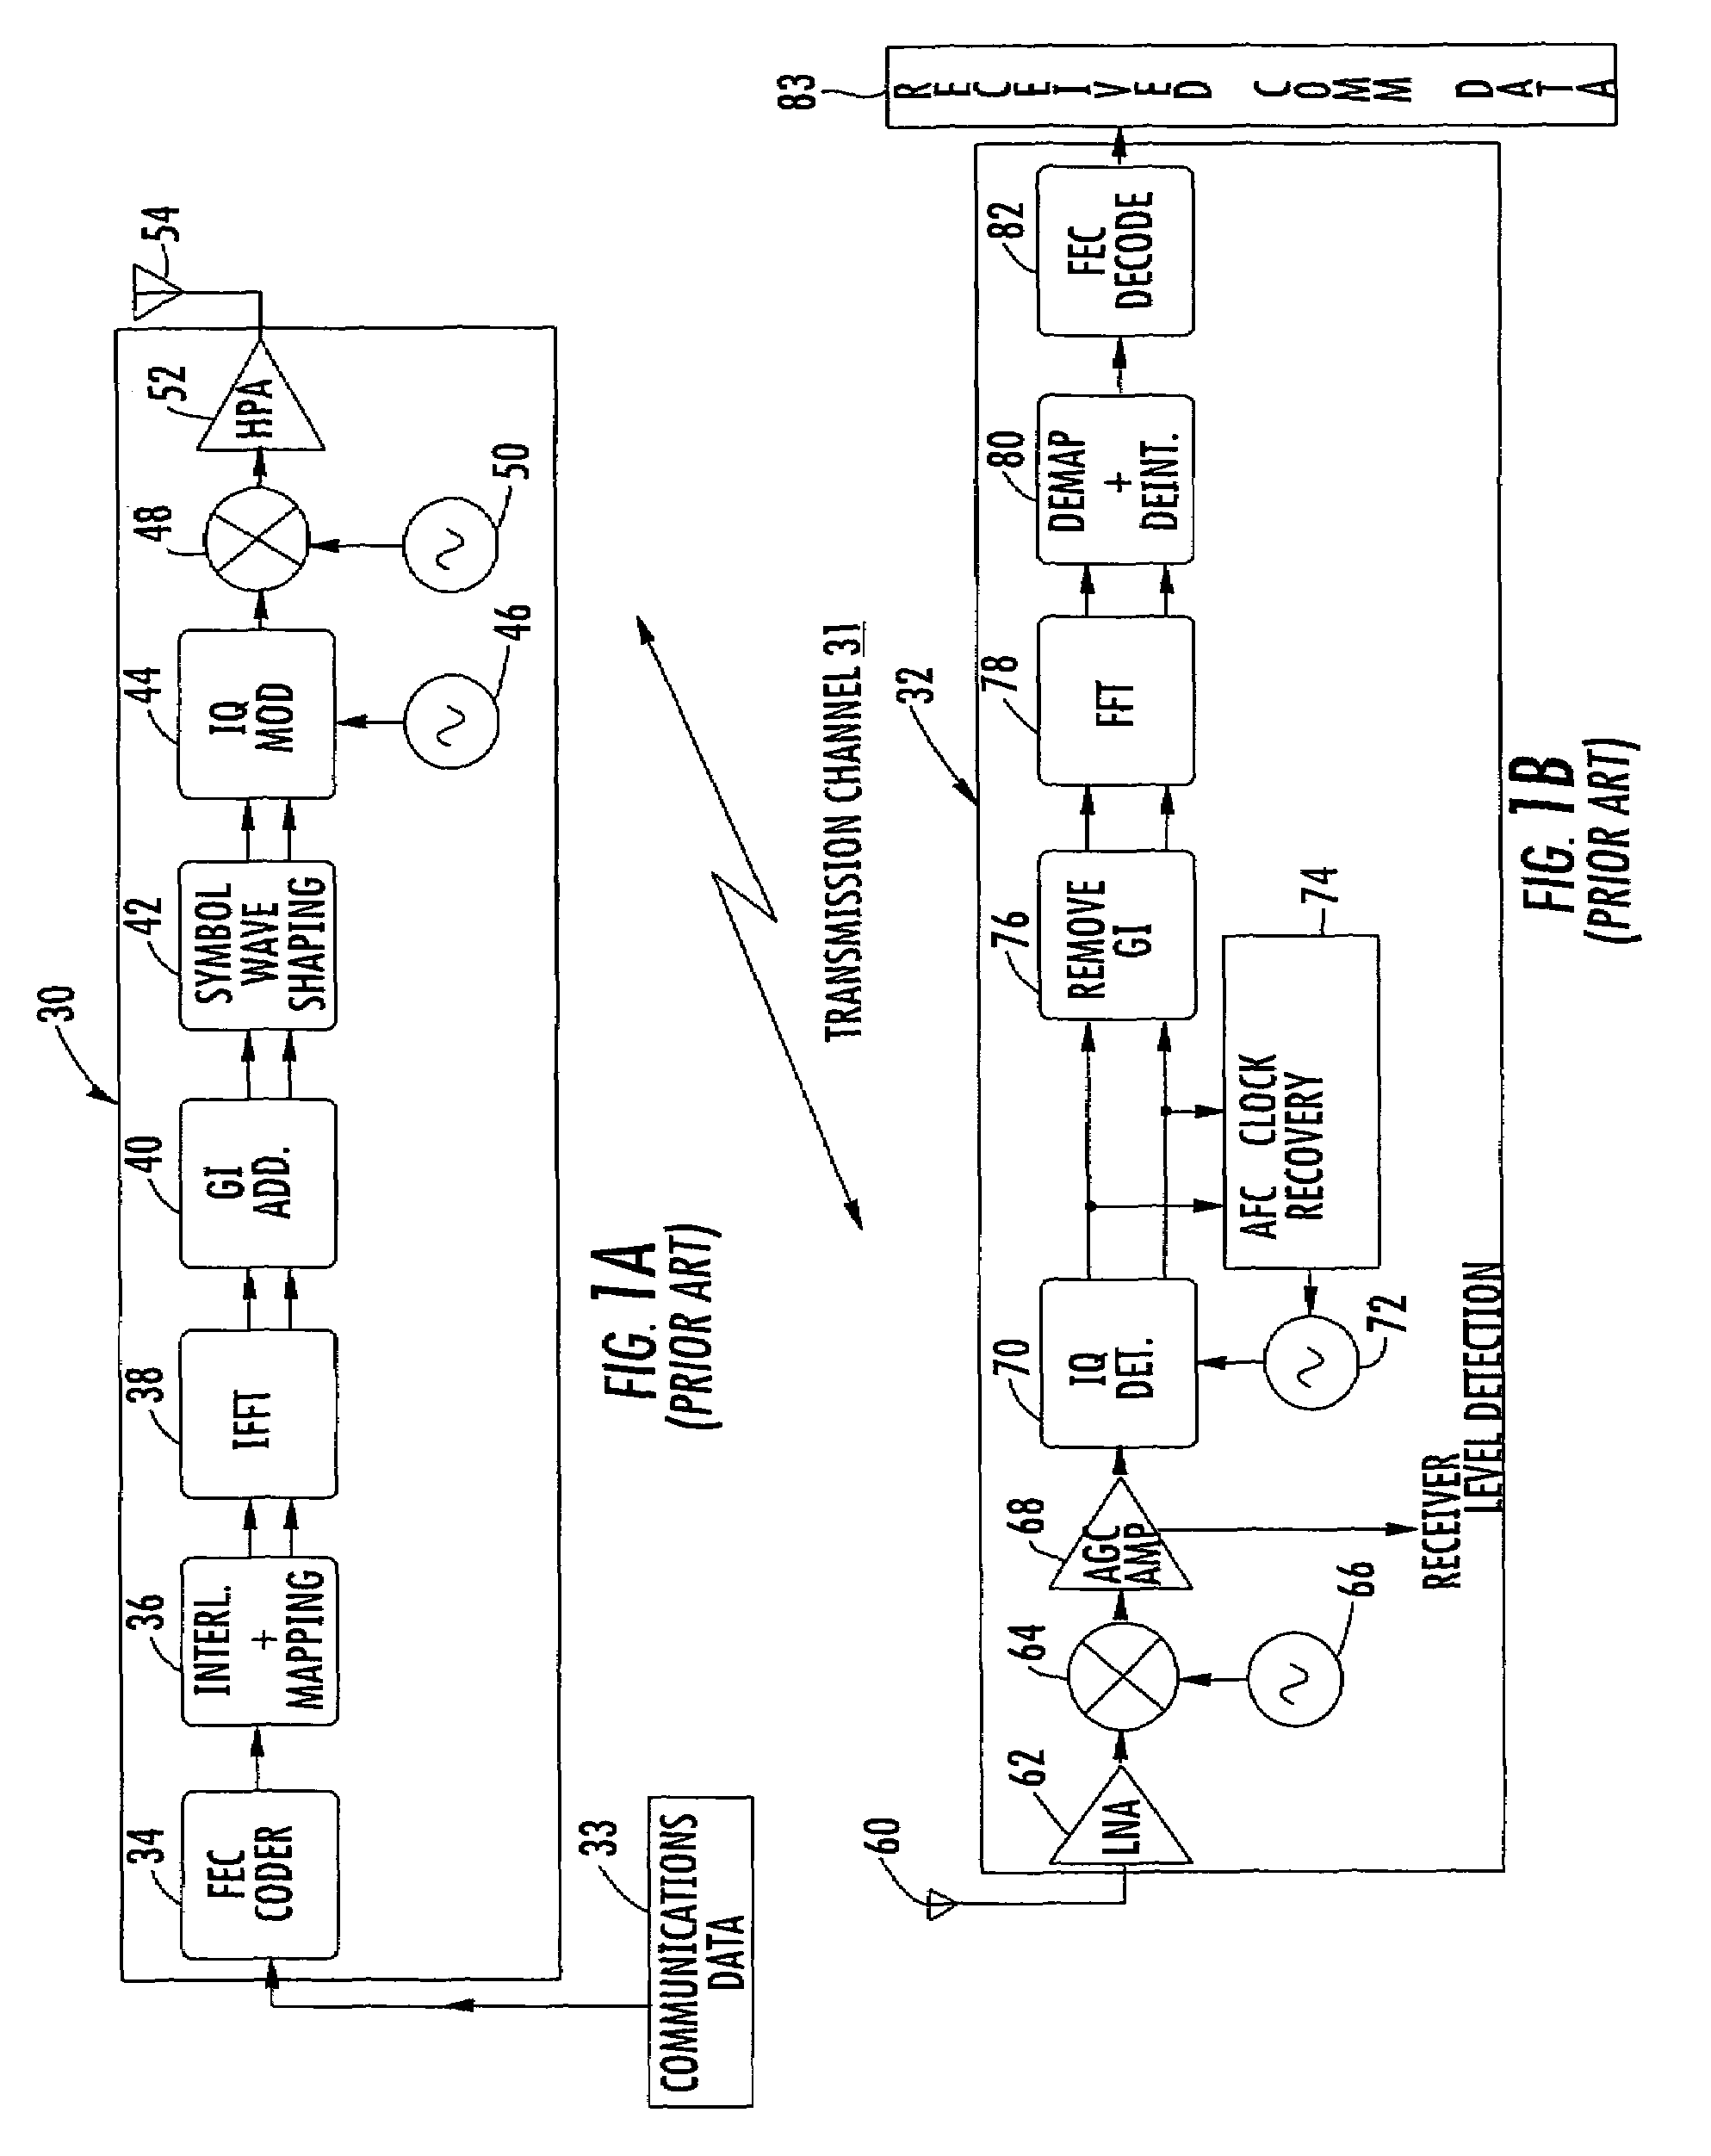 System and method for communicating data using symbol-based randomized orthogonal frequency division multiplexing (OFDM)